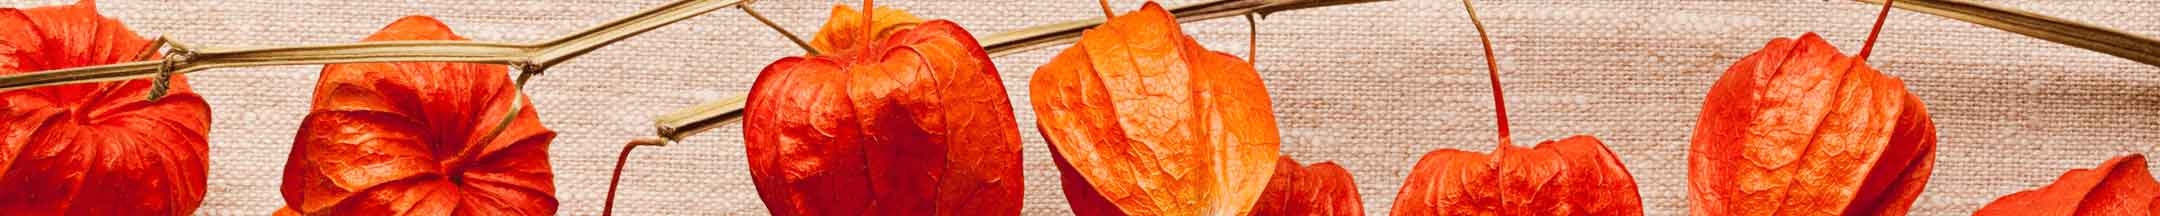 Delicate orange chinese lantern pods (physalis alkekengi) lined up on a branch, presenting a bright display of their papery husks against a textured beige background.